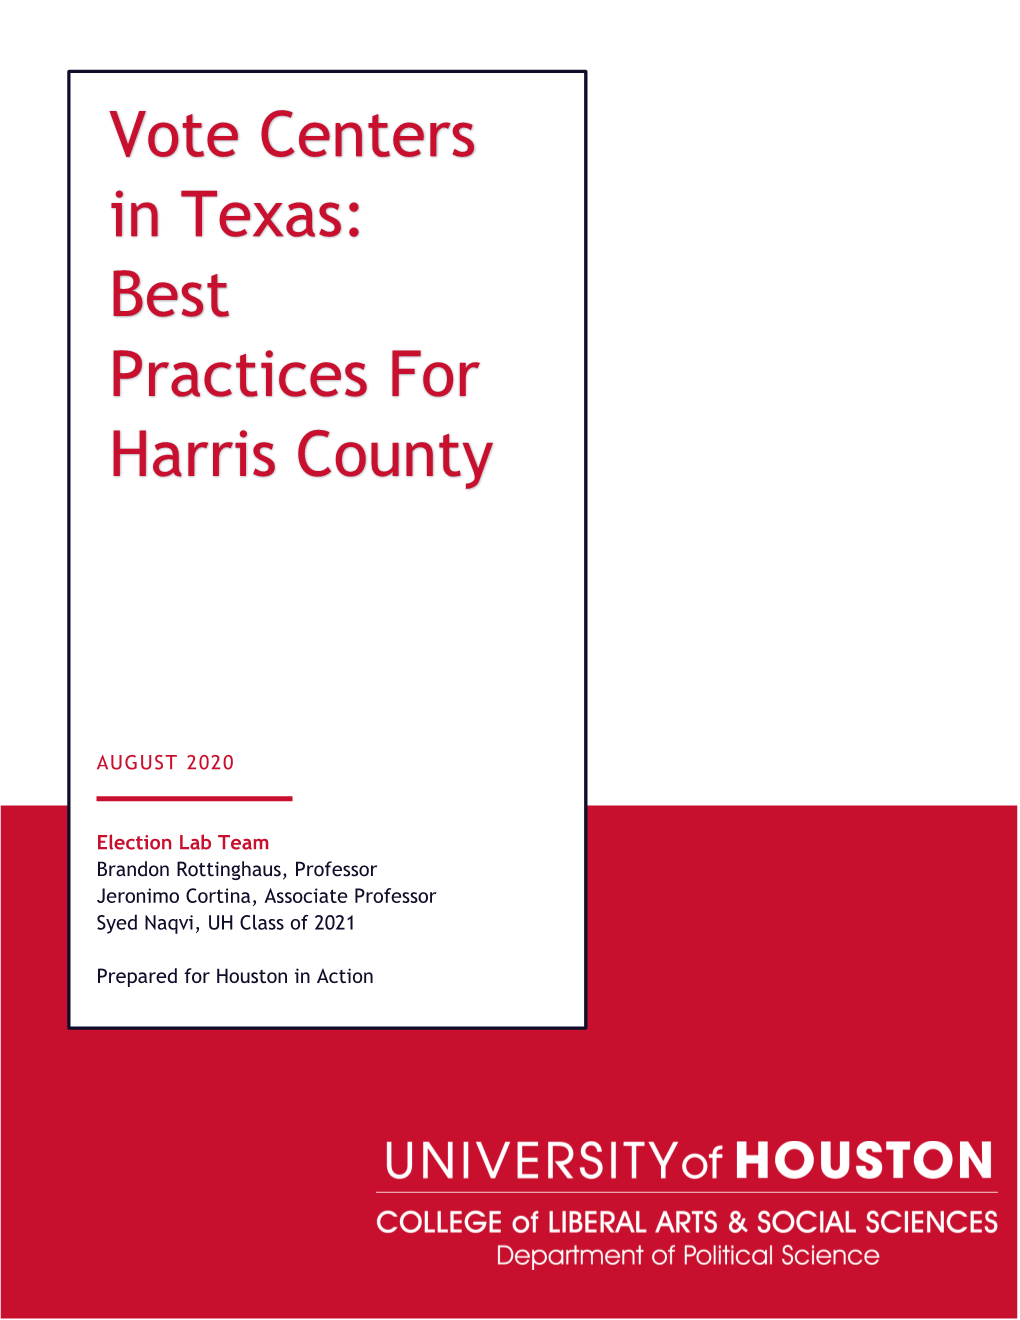 Vote Centers in Texas: Best Practices for Harris County